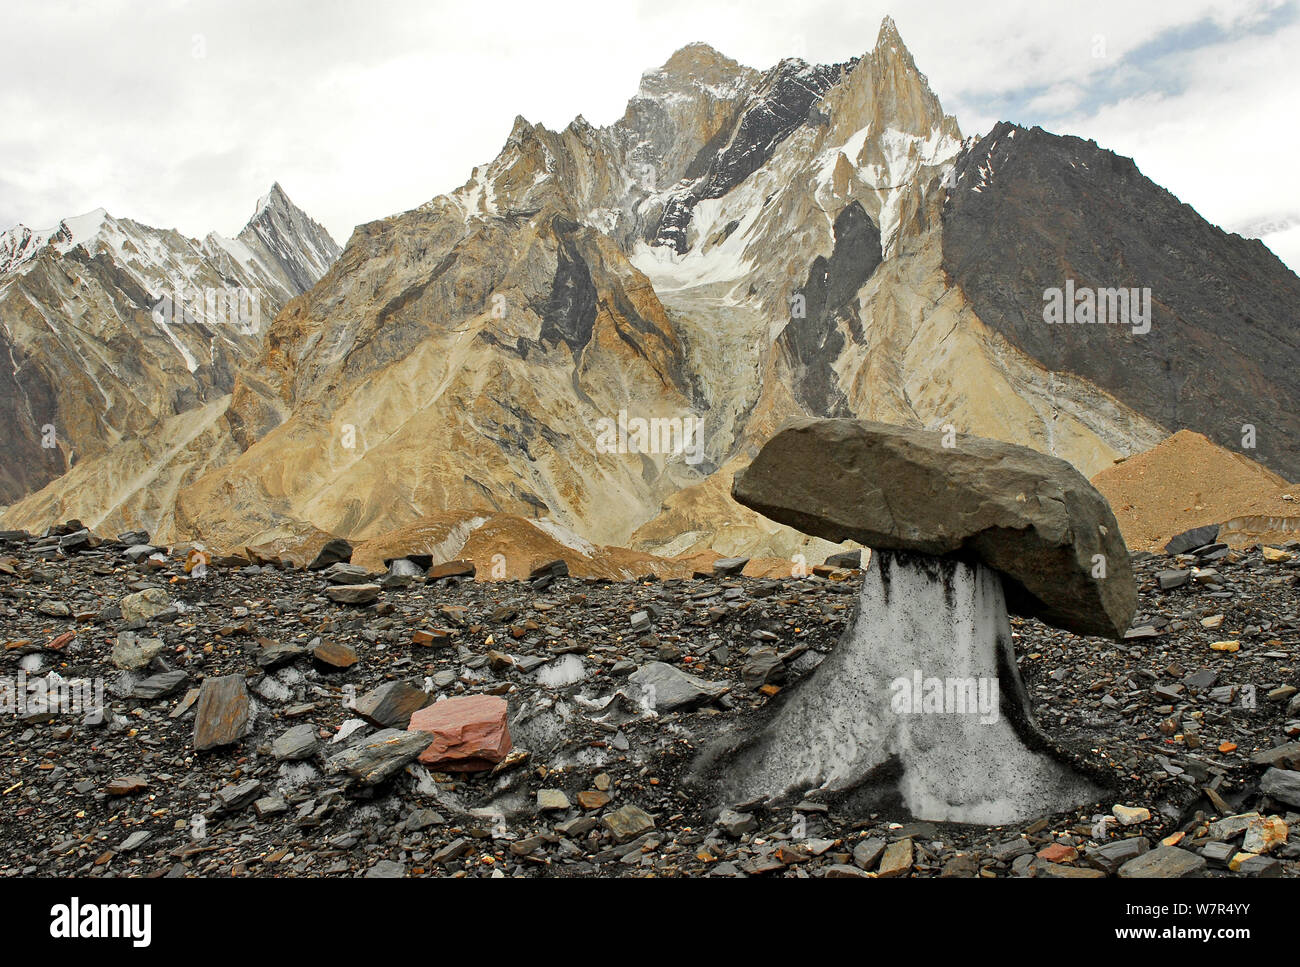 Rocks on the surface of the Baltoro Glacier, with mountains in the background, Central Karakoram National Park, Pakistan, June 2007. Stock Photo